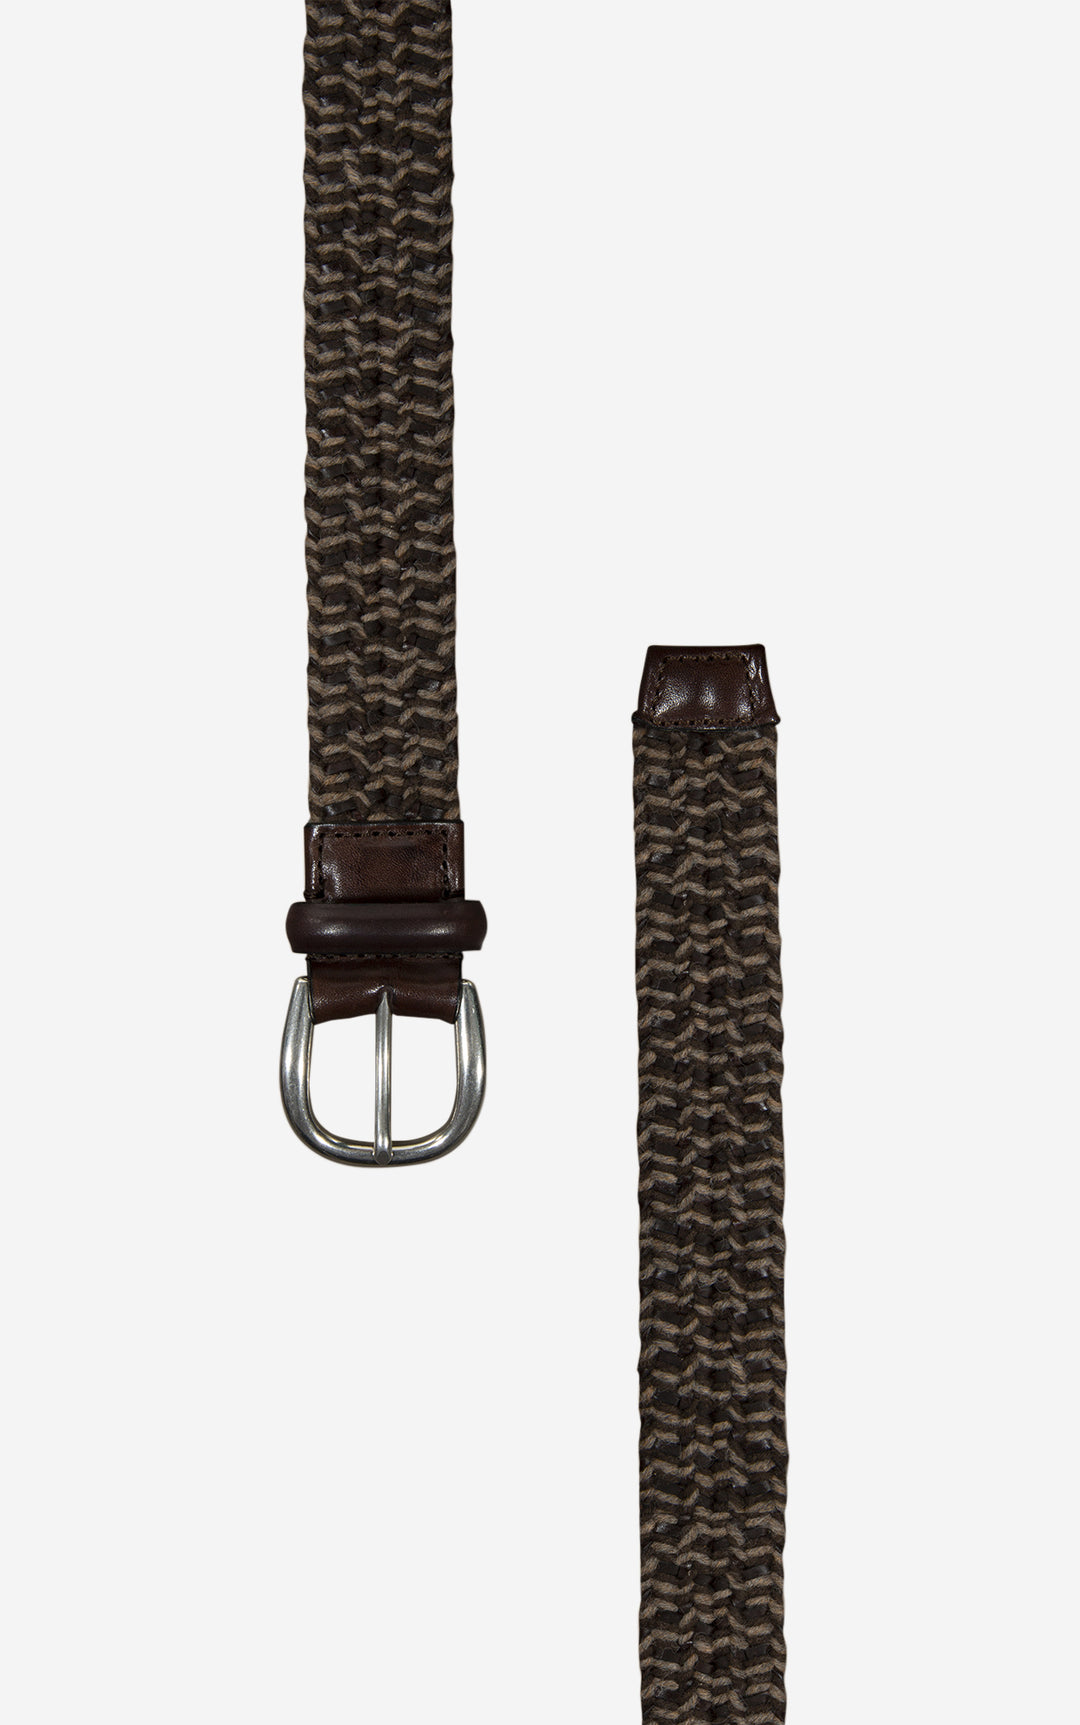 TOLOSA BRAIDED WOOL AND LEATHER BELT BROWN/BEIGE